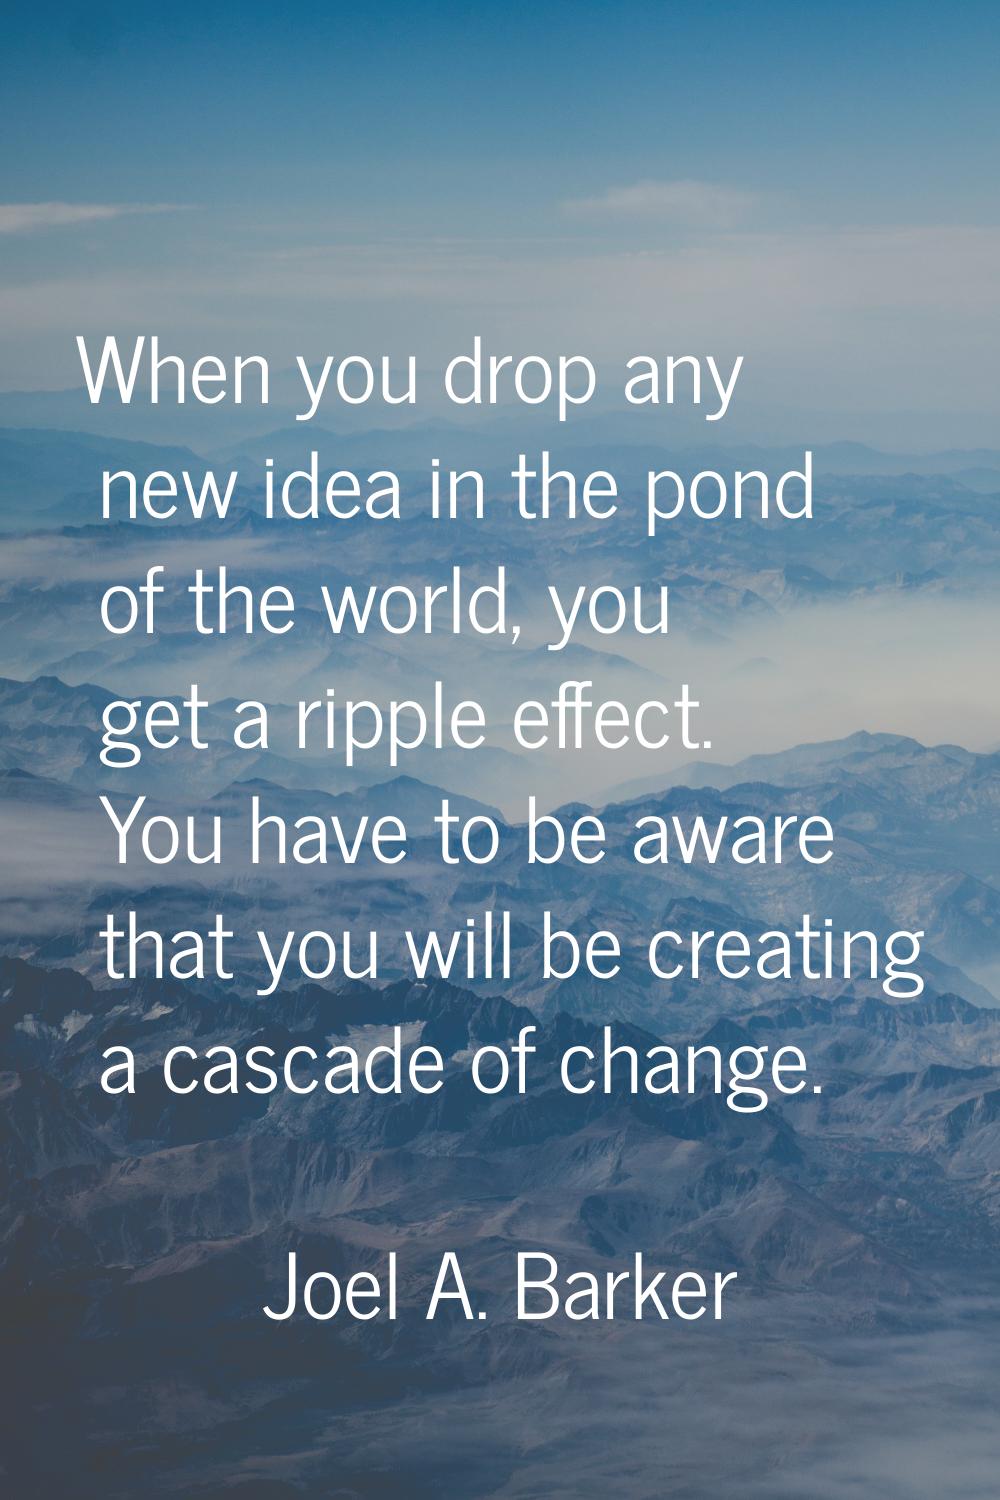 When you drop any new idea in the pond of the world, you get a ripple effect. You have to be aware 